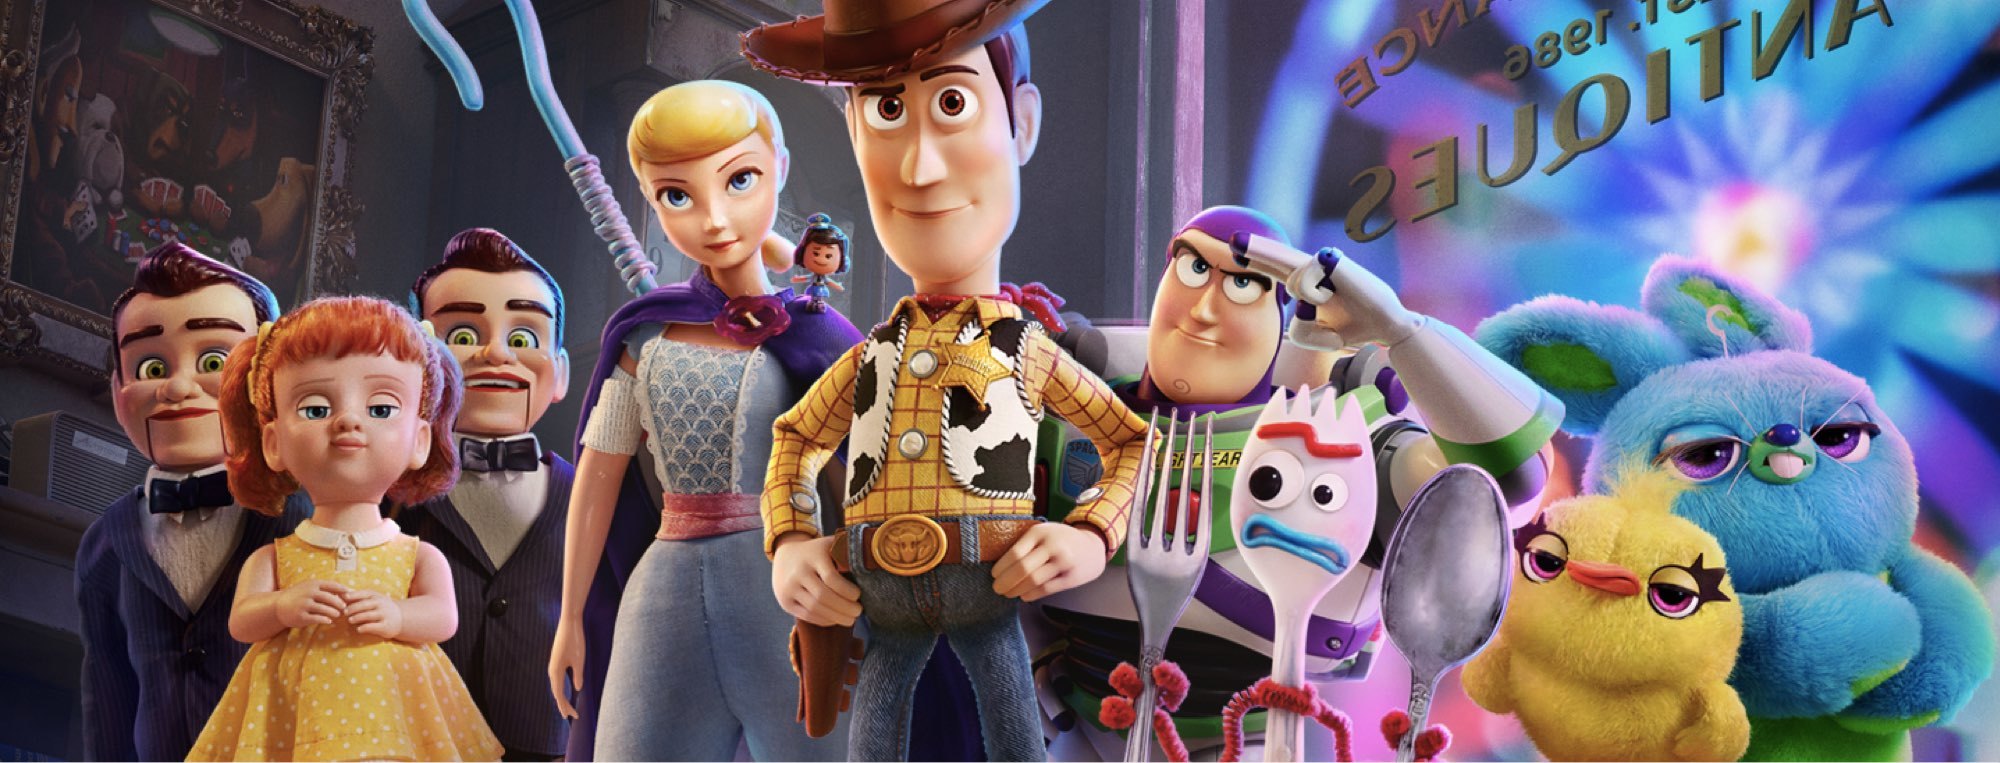 Toy Story 4 download the new version for ipod